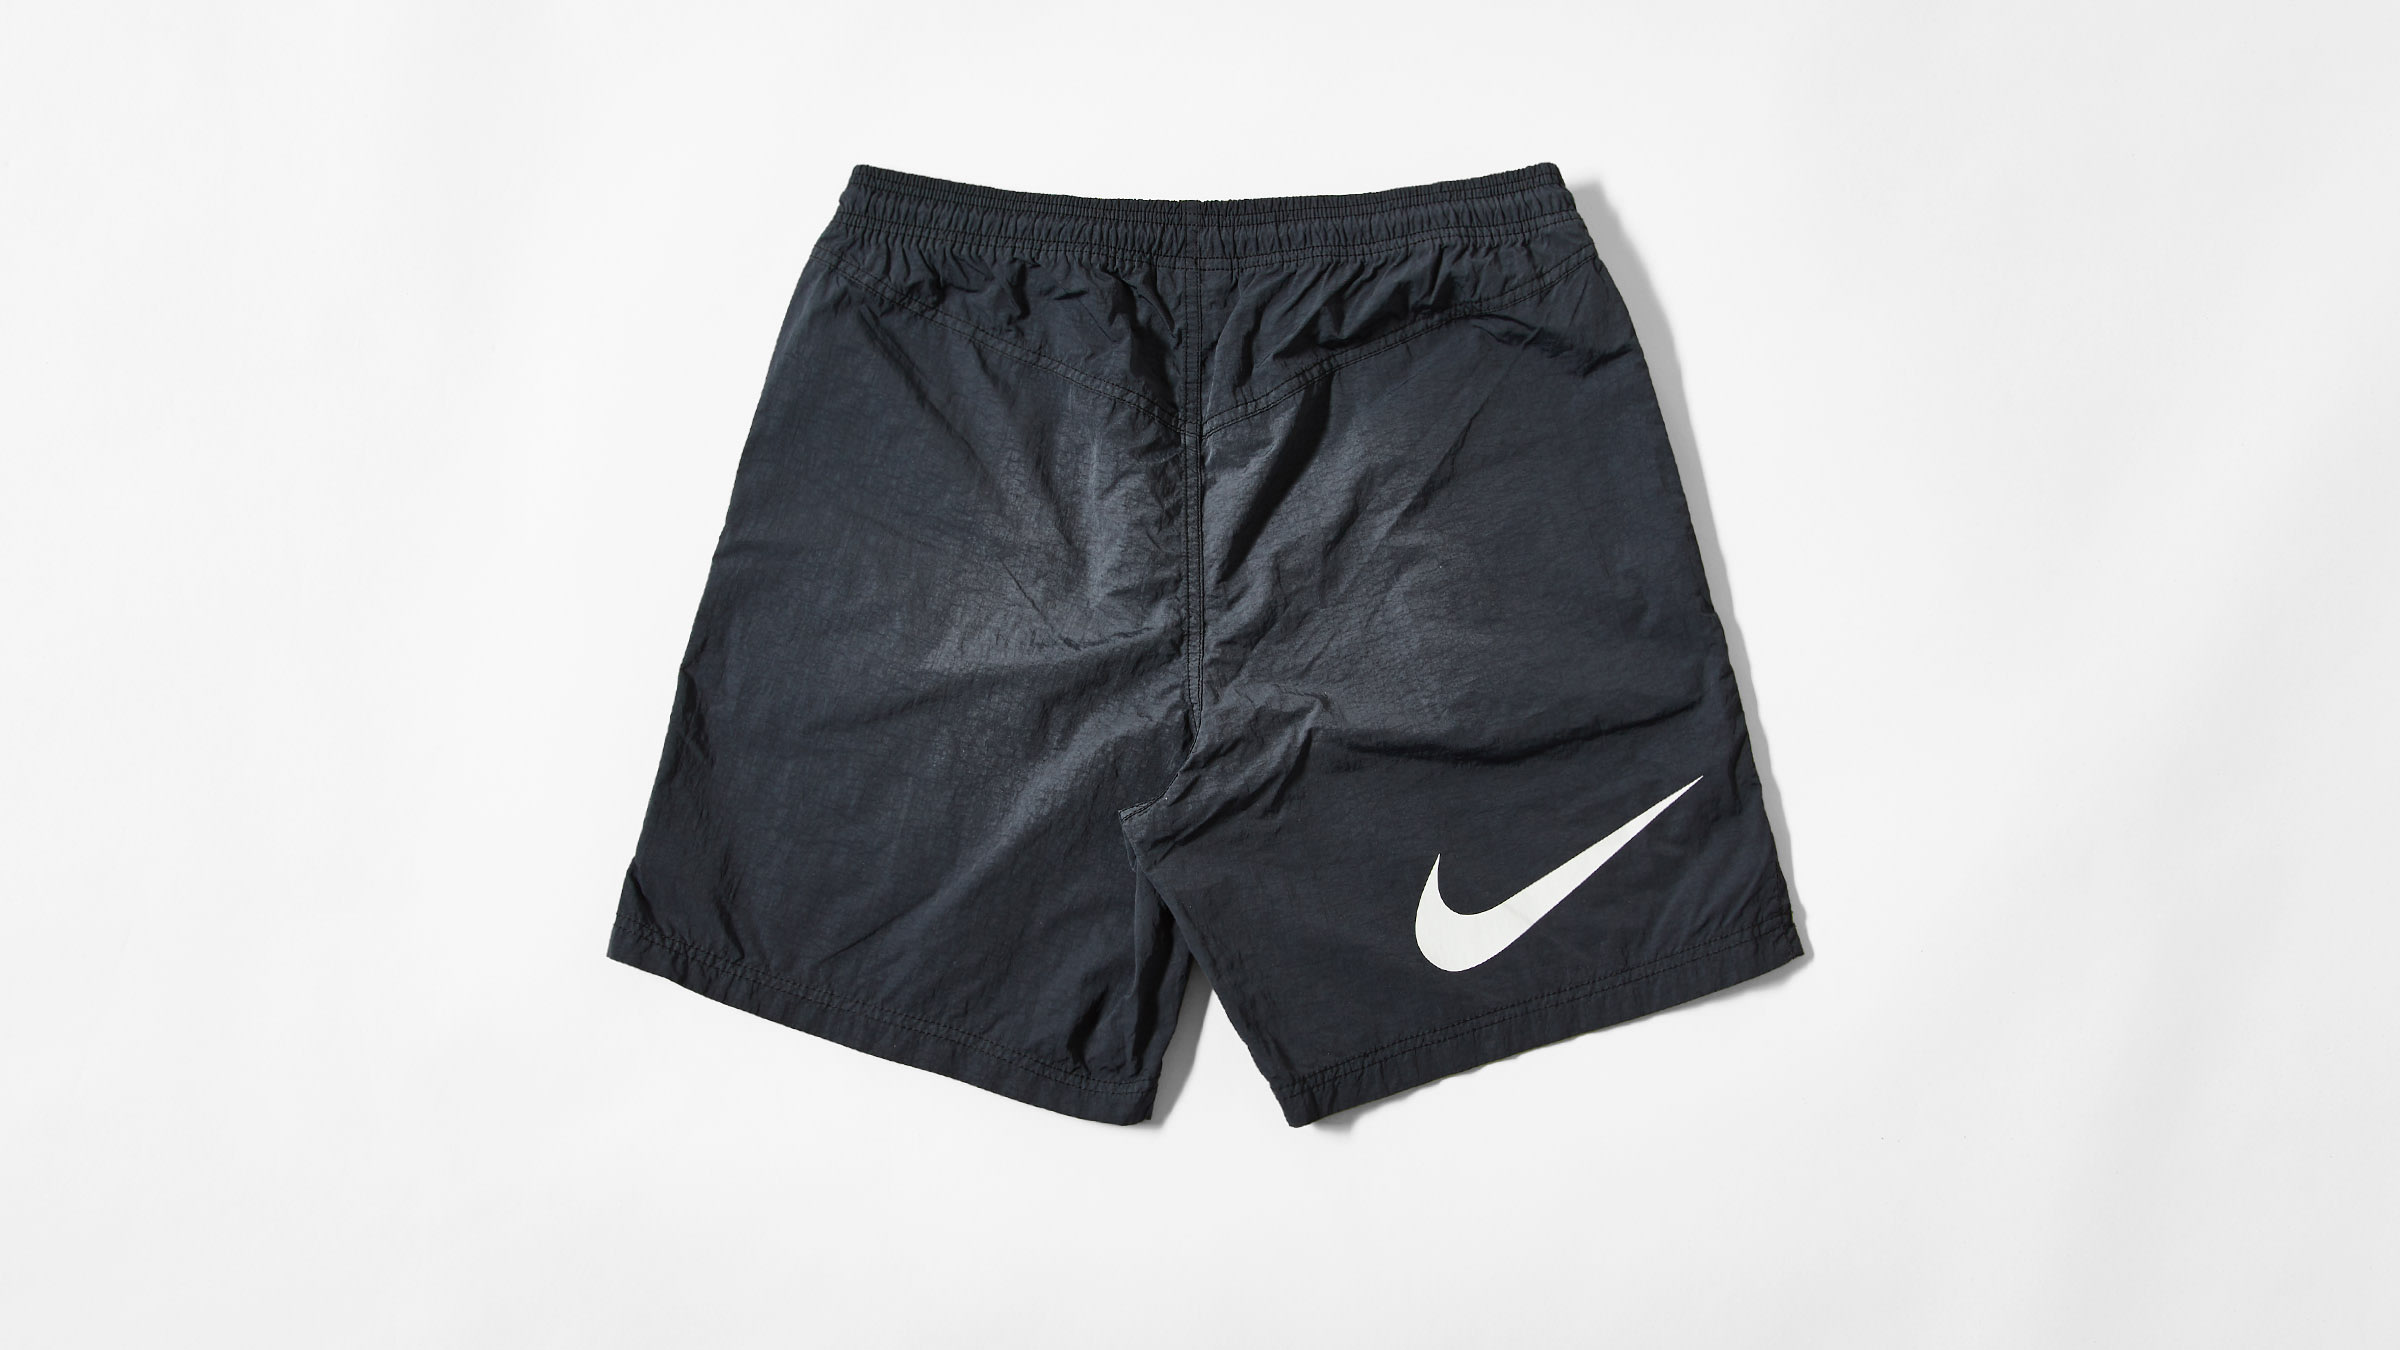 Nike x Stussy Water Short (Black) | END. Launches